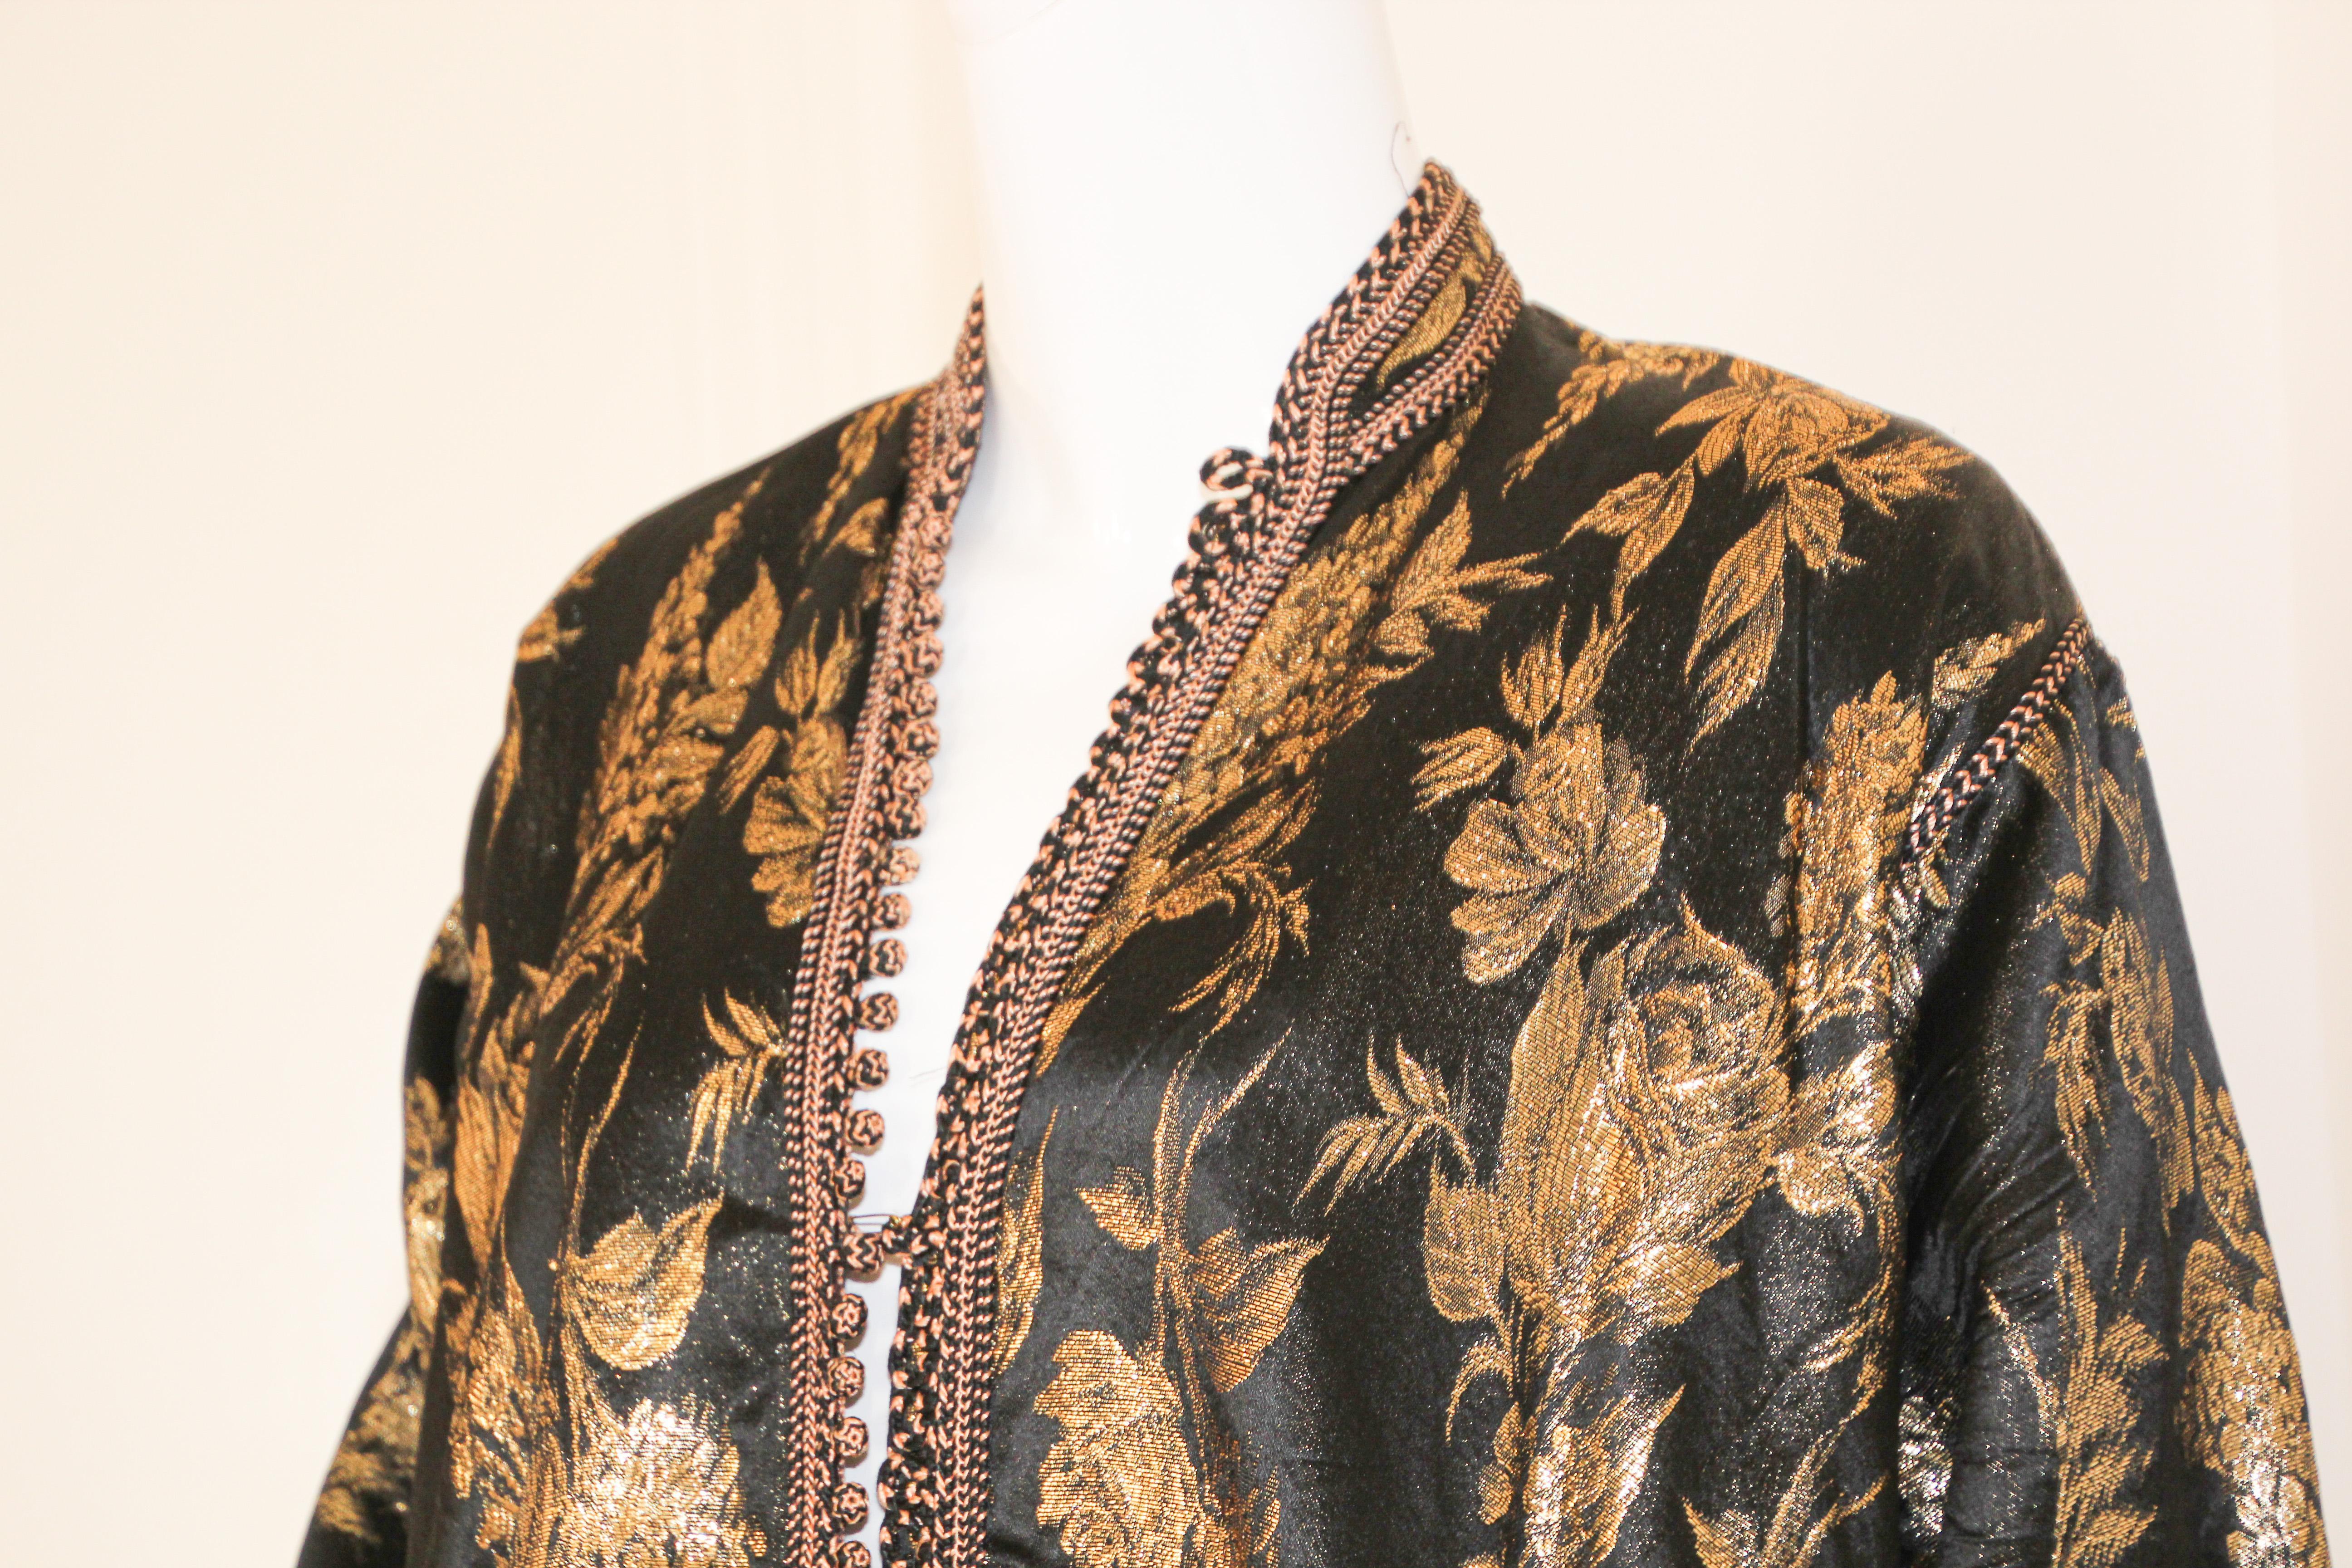 Vintage Moroccan Caftan, Black and Gold Embroidered, ca. 1960s For Sale 2